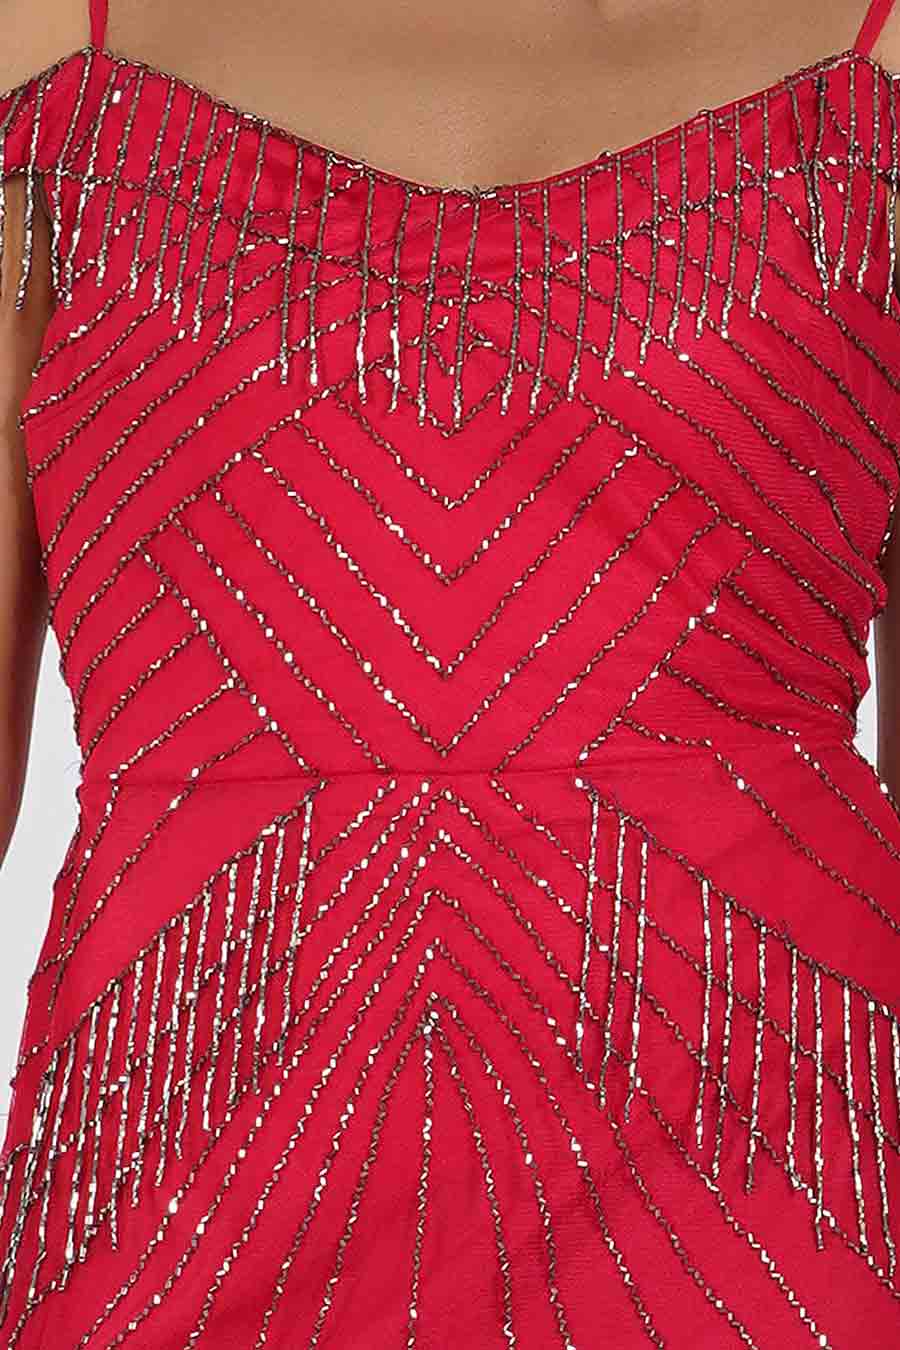 Red Beaded Off-Shoulder Gown